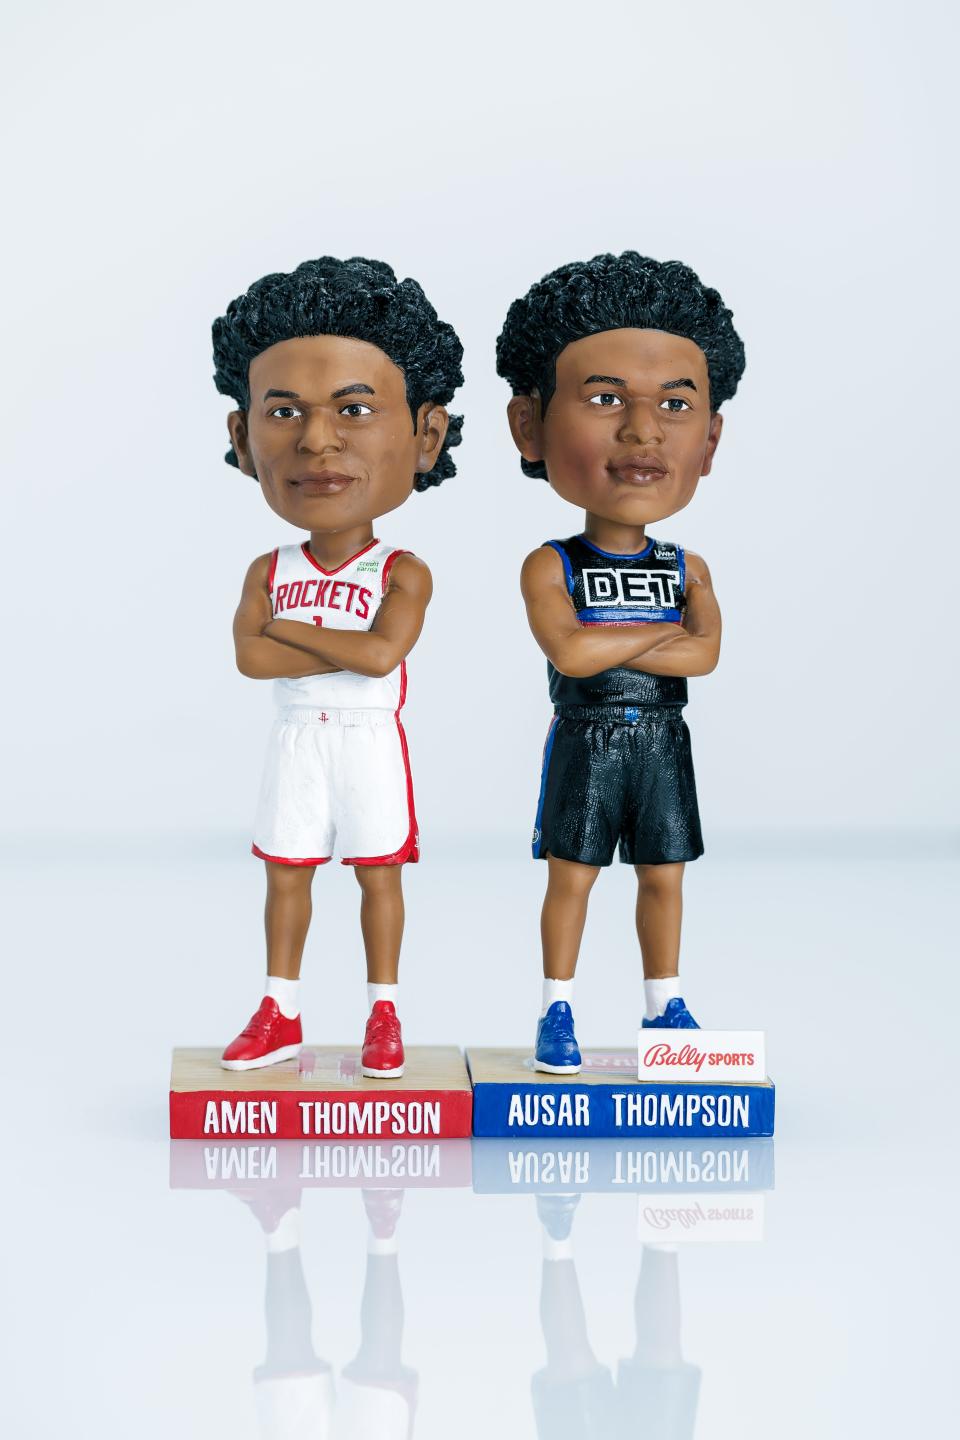 The Detroit Pistons and Houston Rockets will be having a joint-bobblehead giveaway to honor the Thompson brothers, Ausar and Amen, when they faceoff in January.